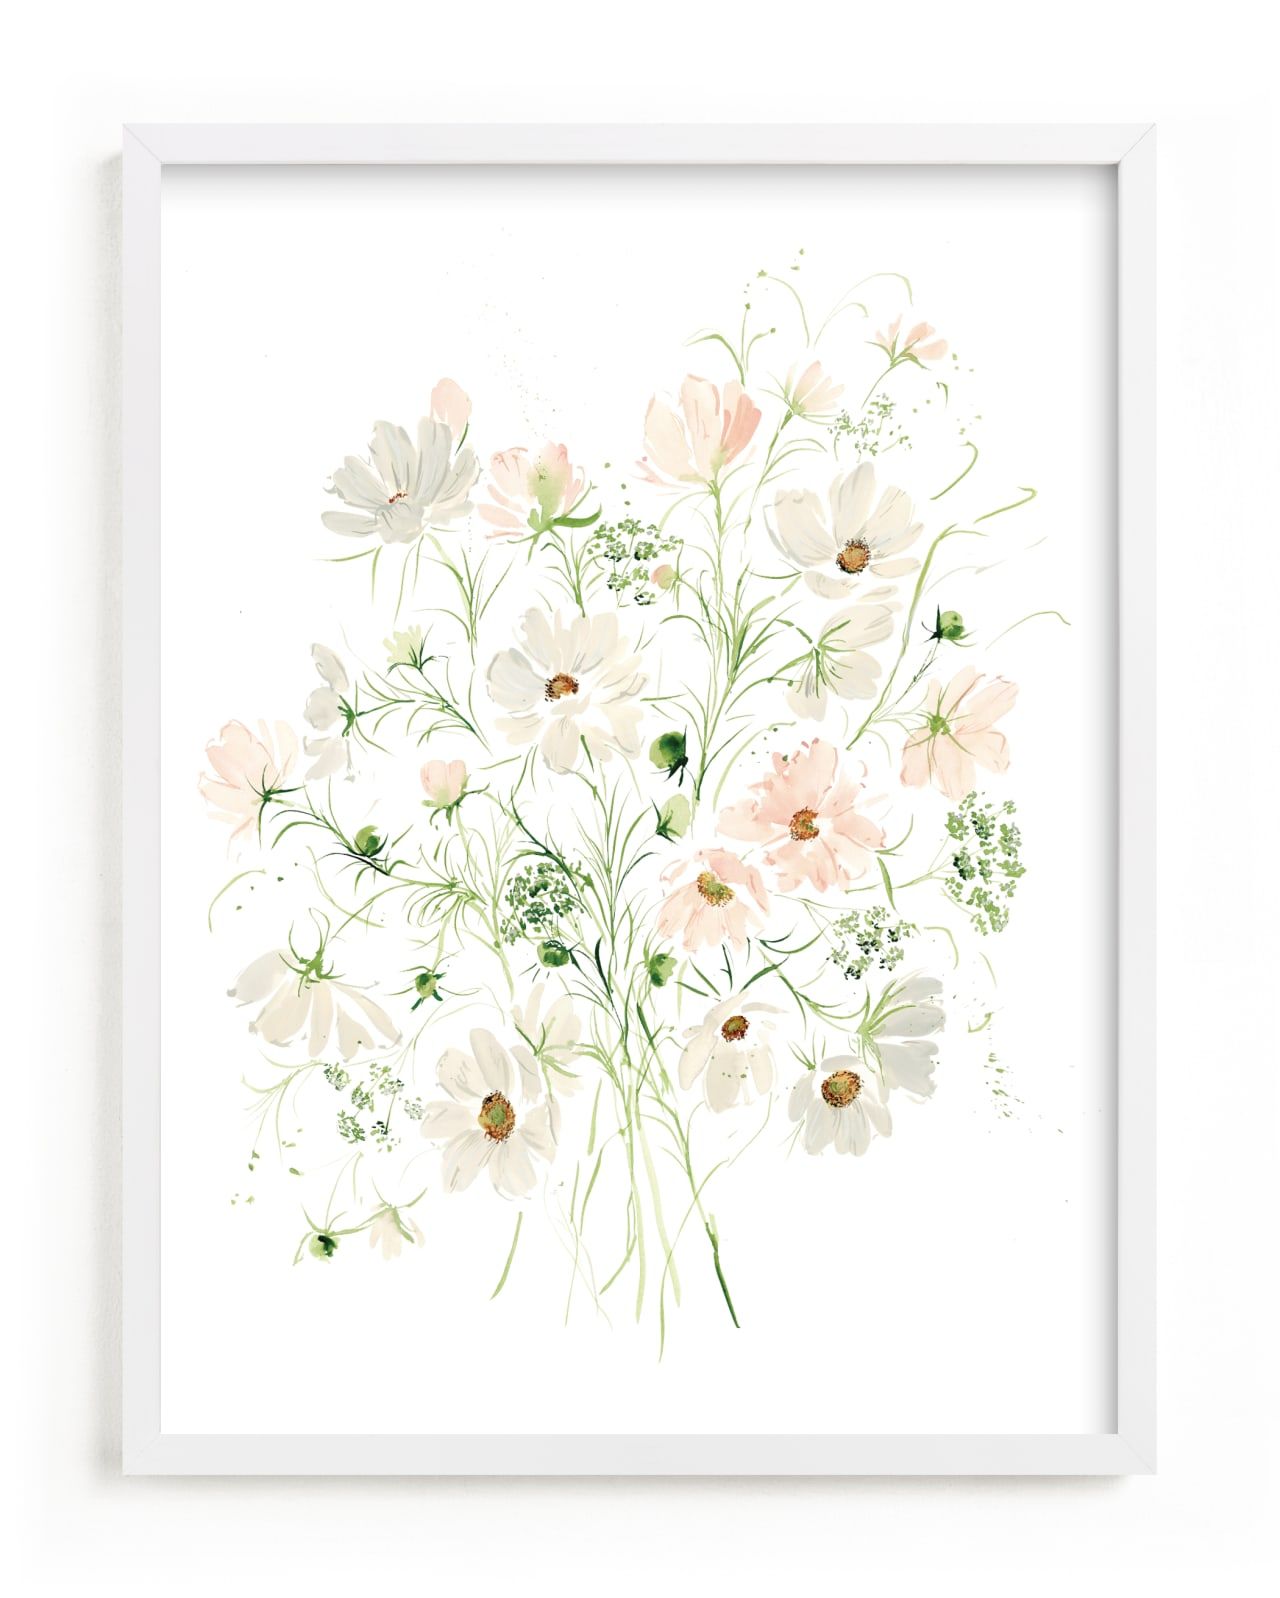 "Cosmos" - Open Edition Children's Art Print by Leah Bisch. | Minted